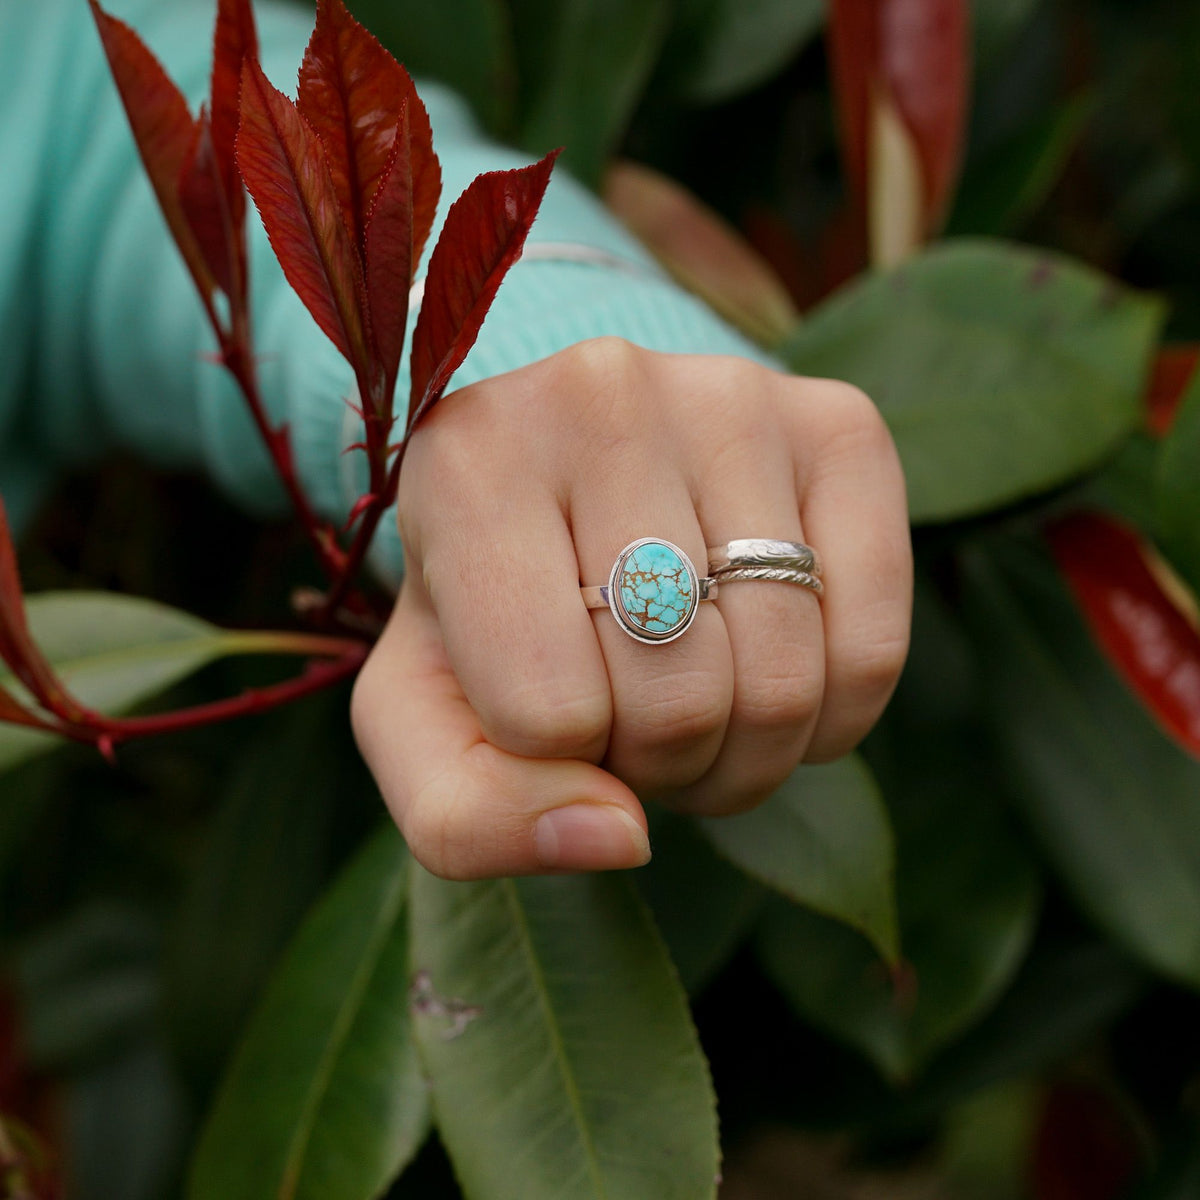 Delicate Pale Blue Turquoise and Silver Ring from the No 8 mine